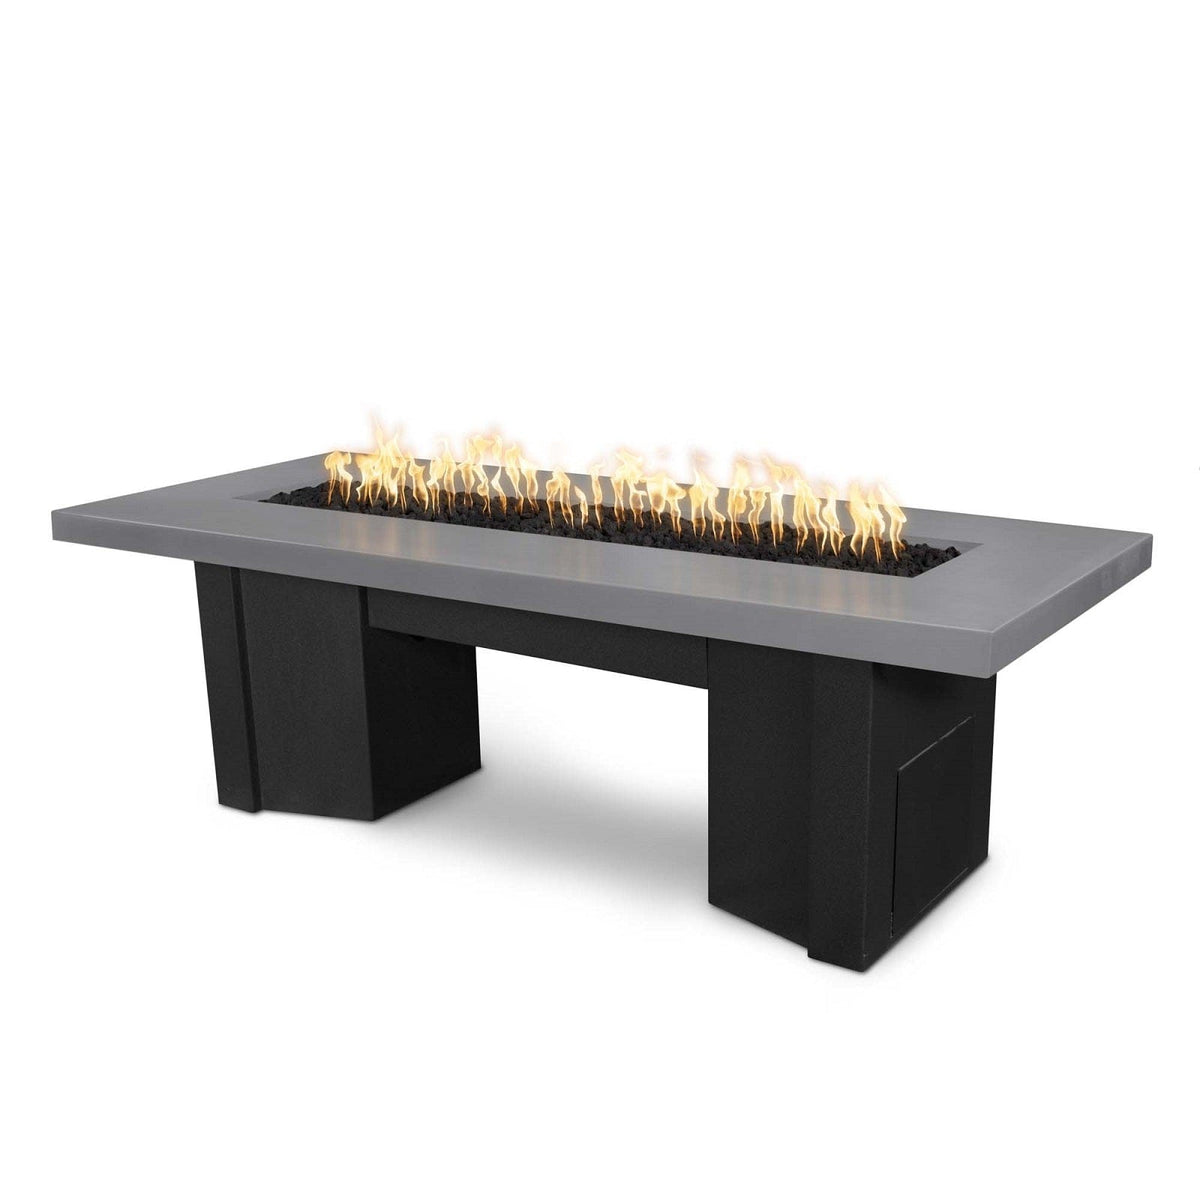 The Outdoor Plus Fire Features Natural Gray (-NGY) / Black Powder Coated Steel (-BLK) The Outdoor Plus 78&quot; Alameda Fire Table Smooth Concrete in Liquid Propane - Match Lit / OPT-ALMGFRC78-LP